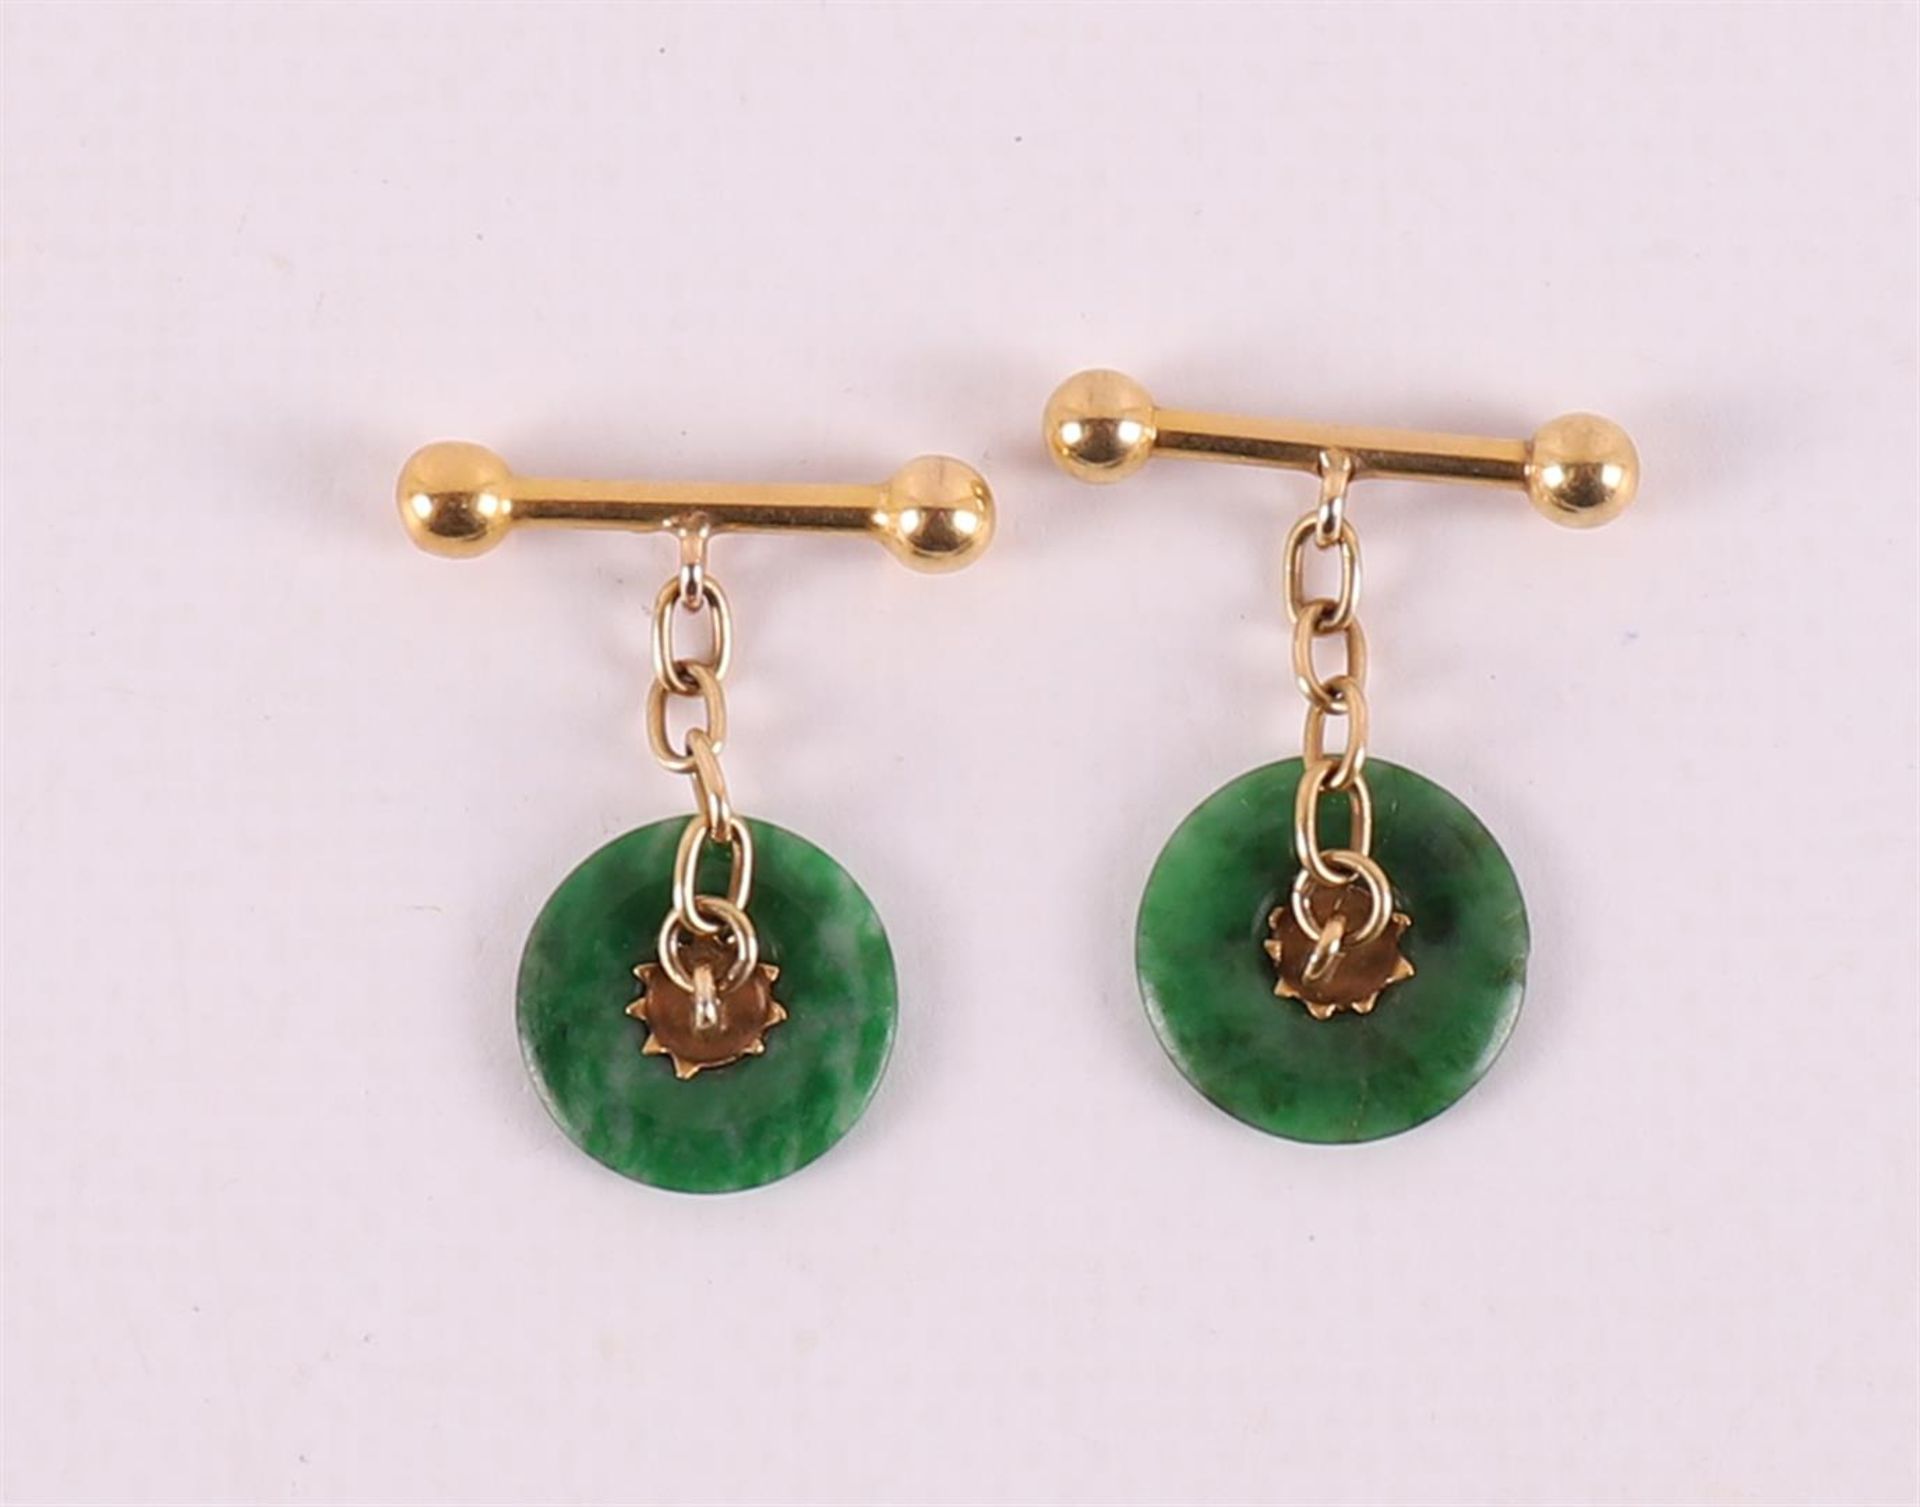 A pair of gold cufflinks with green jade discs. - Image 2 of 3